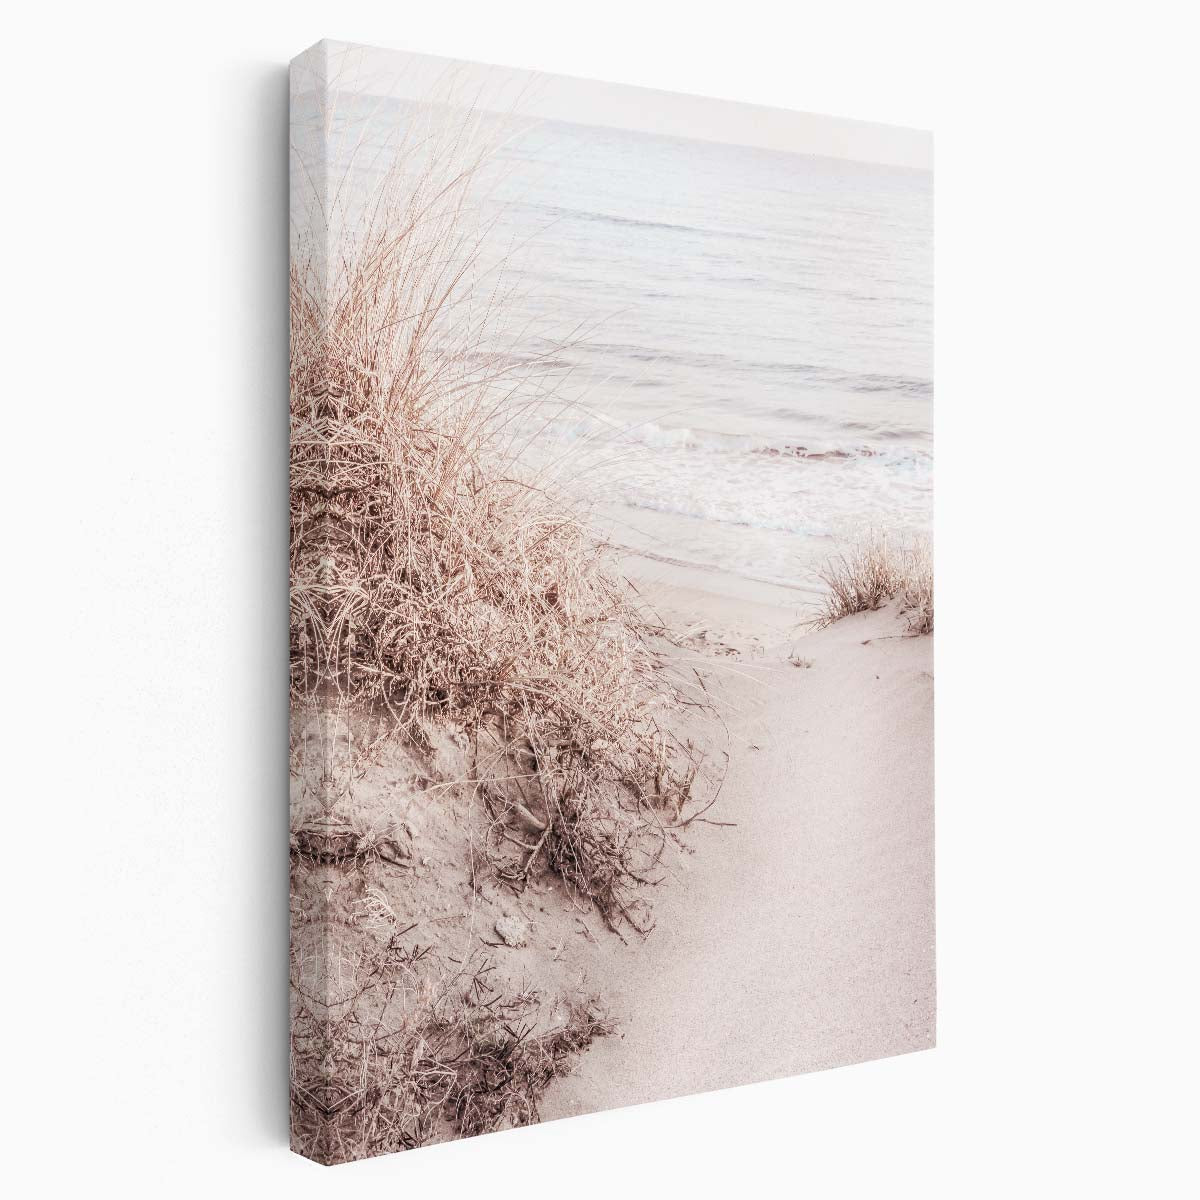 Coastal Beige Beach Sand Dunes Photography, Seascape Wall Art by Luxuriance Designs, made in USA